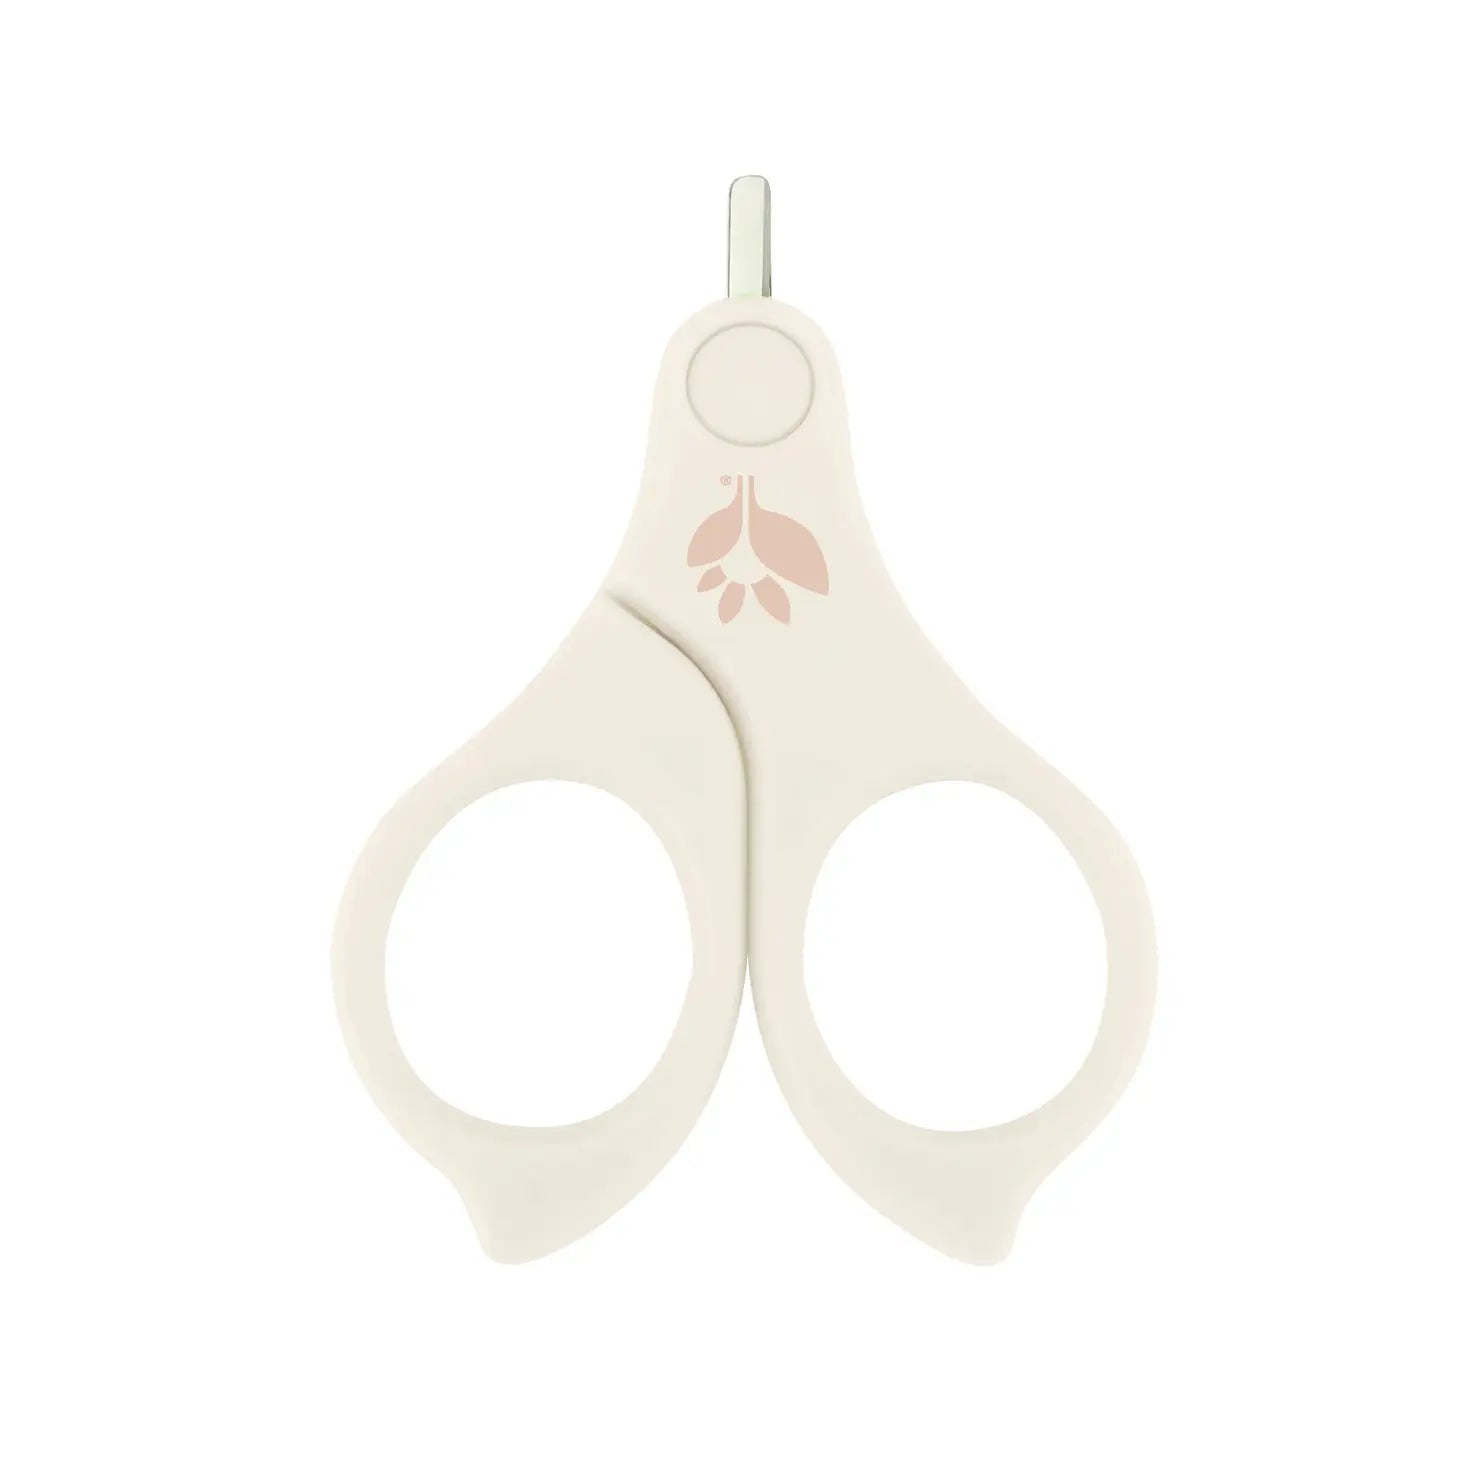 Pigeon Baby Nail Scissors with Rounded Tip